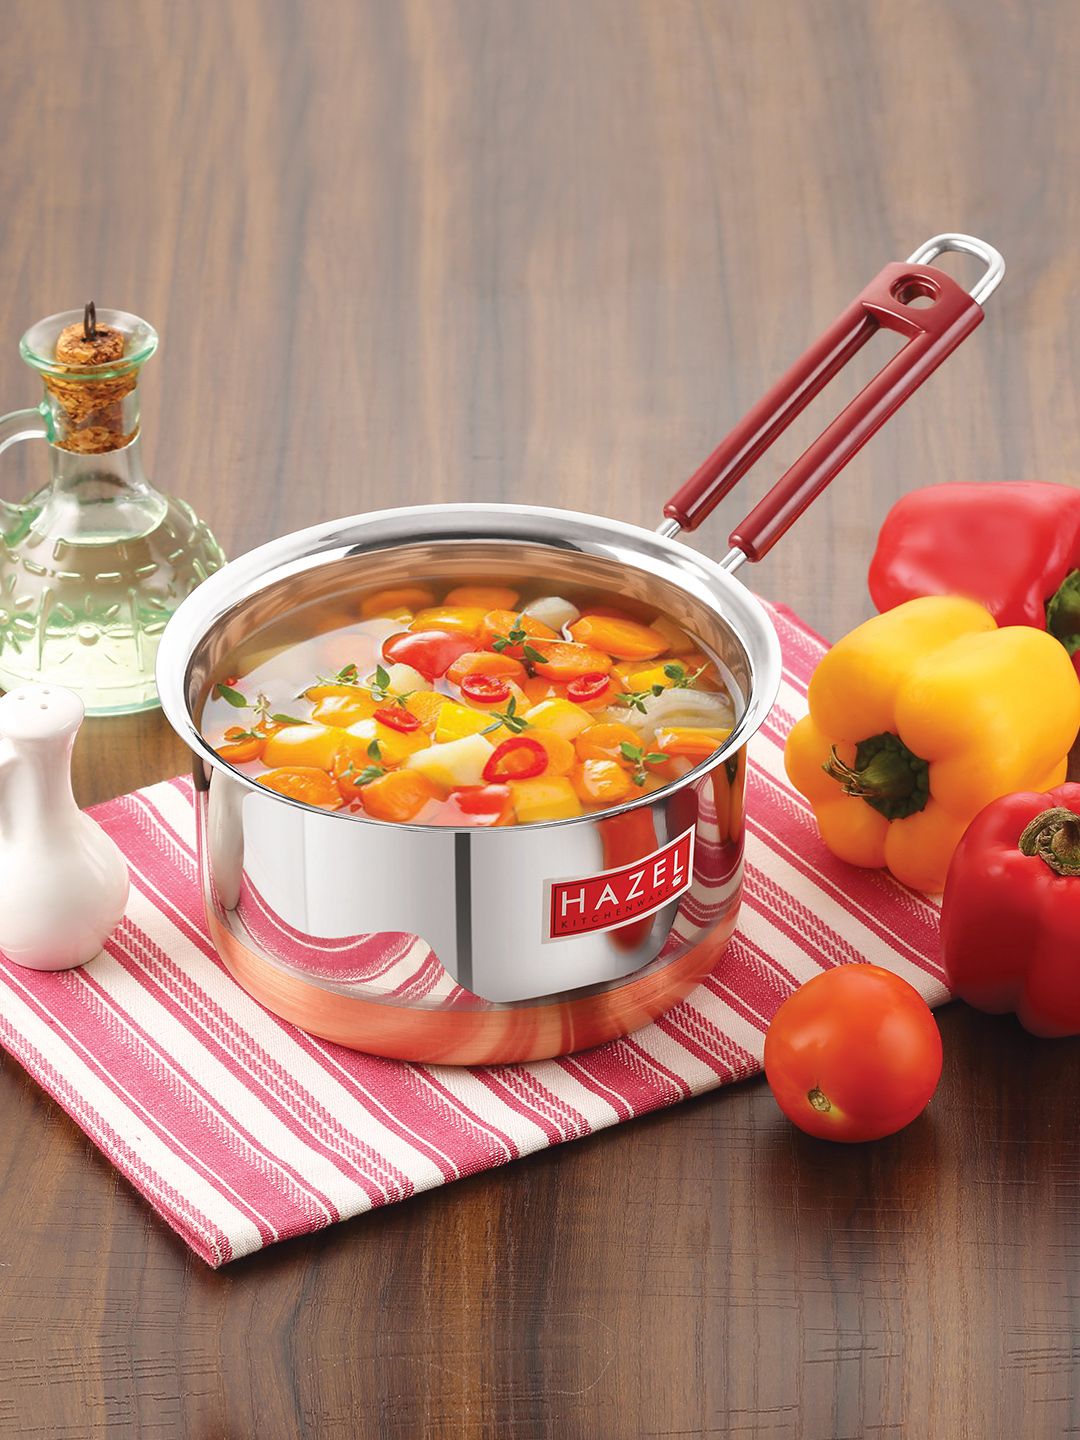 HAZEL Silver-Toned Stainless Steel Saucepan With Fixed Rubber Grip Handle Price in India